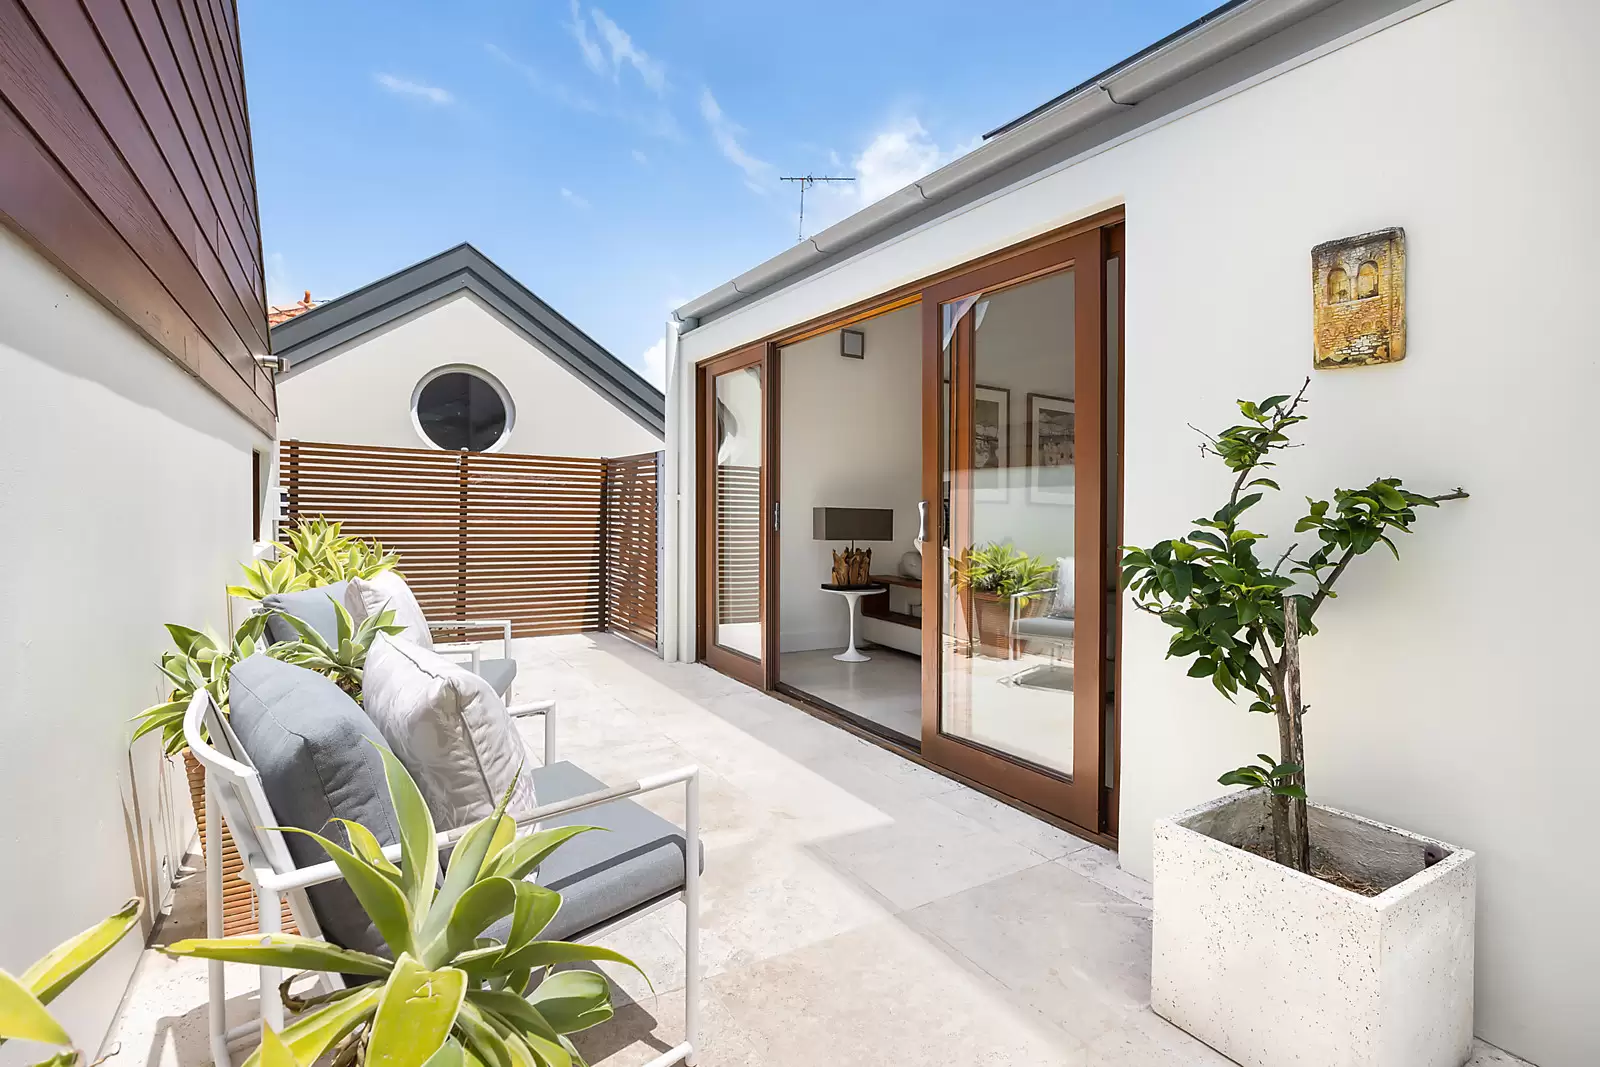 Photo #11: 62 Brook Street, Coogee - Sold by Sydney Sotheby's International Realty